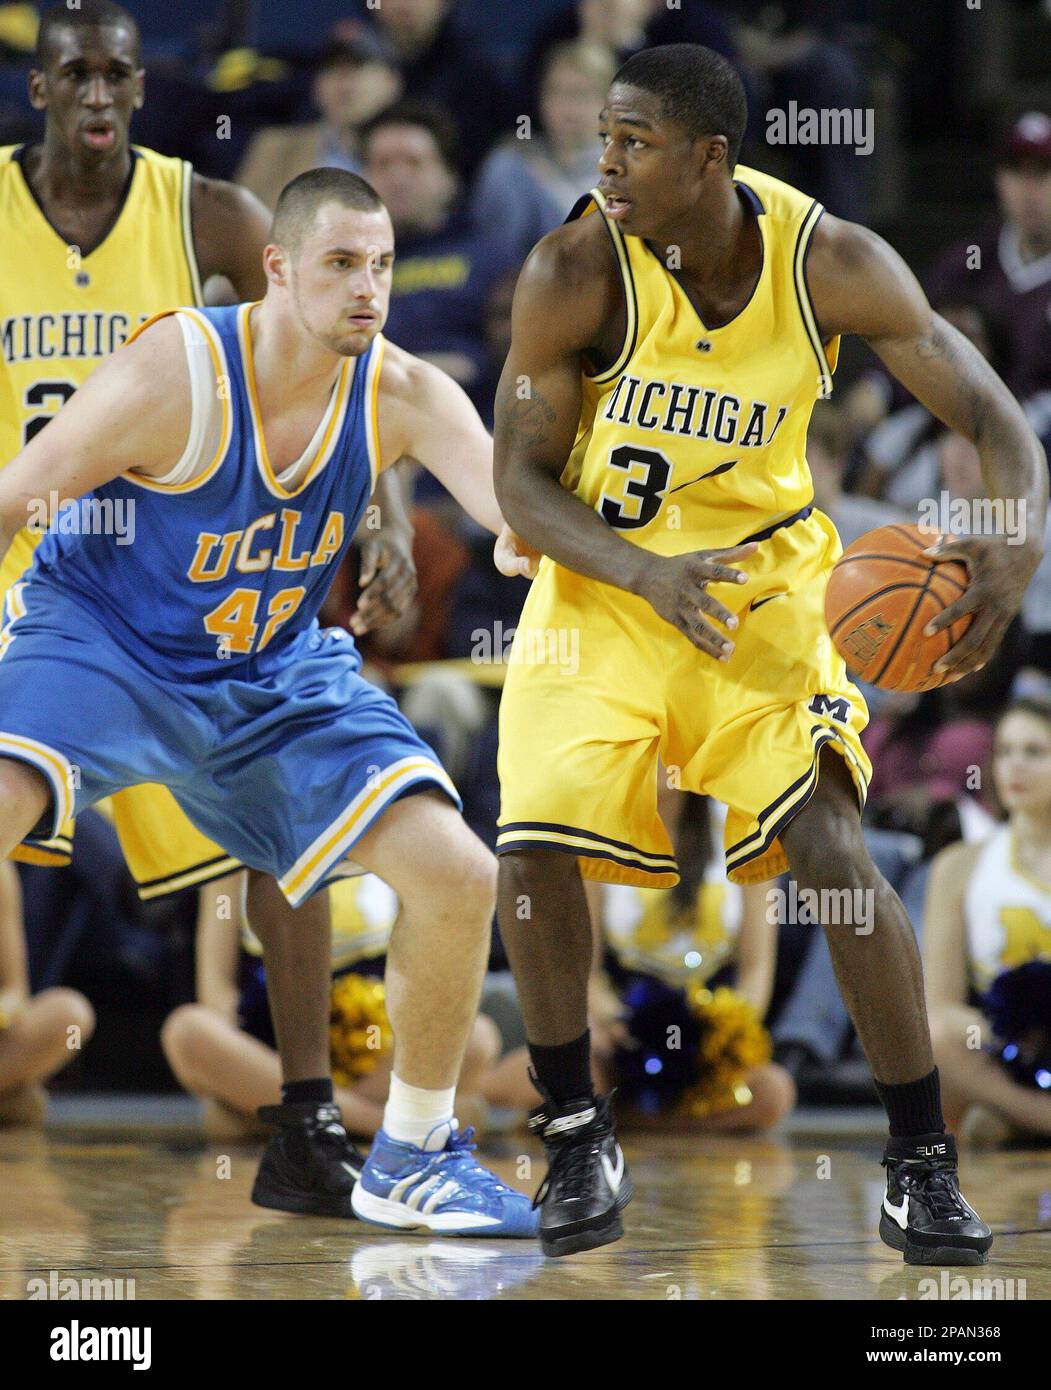 UCLA center Kevin Love (42) reacts after drawing a foul in the first half  of a college basketball game with Michigan, Saturday, Dec. 22, 2007, in Ann  Arbor, Mich. (AP Photo/Tony Ding